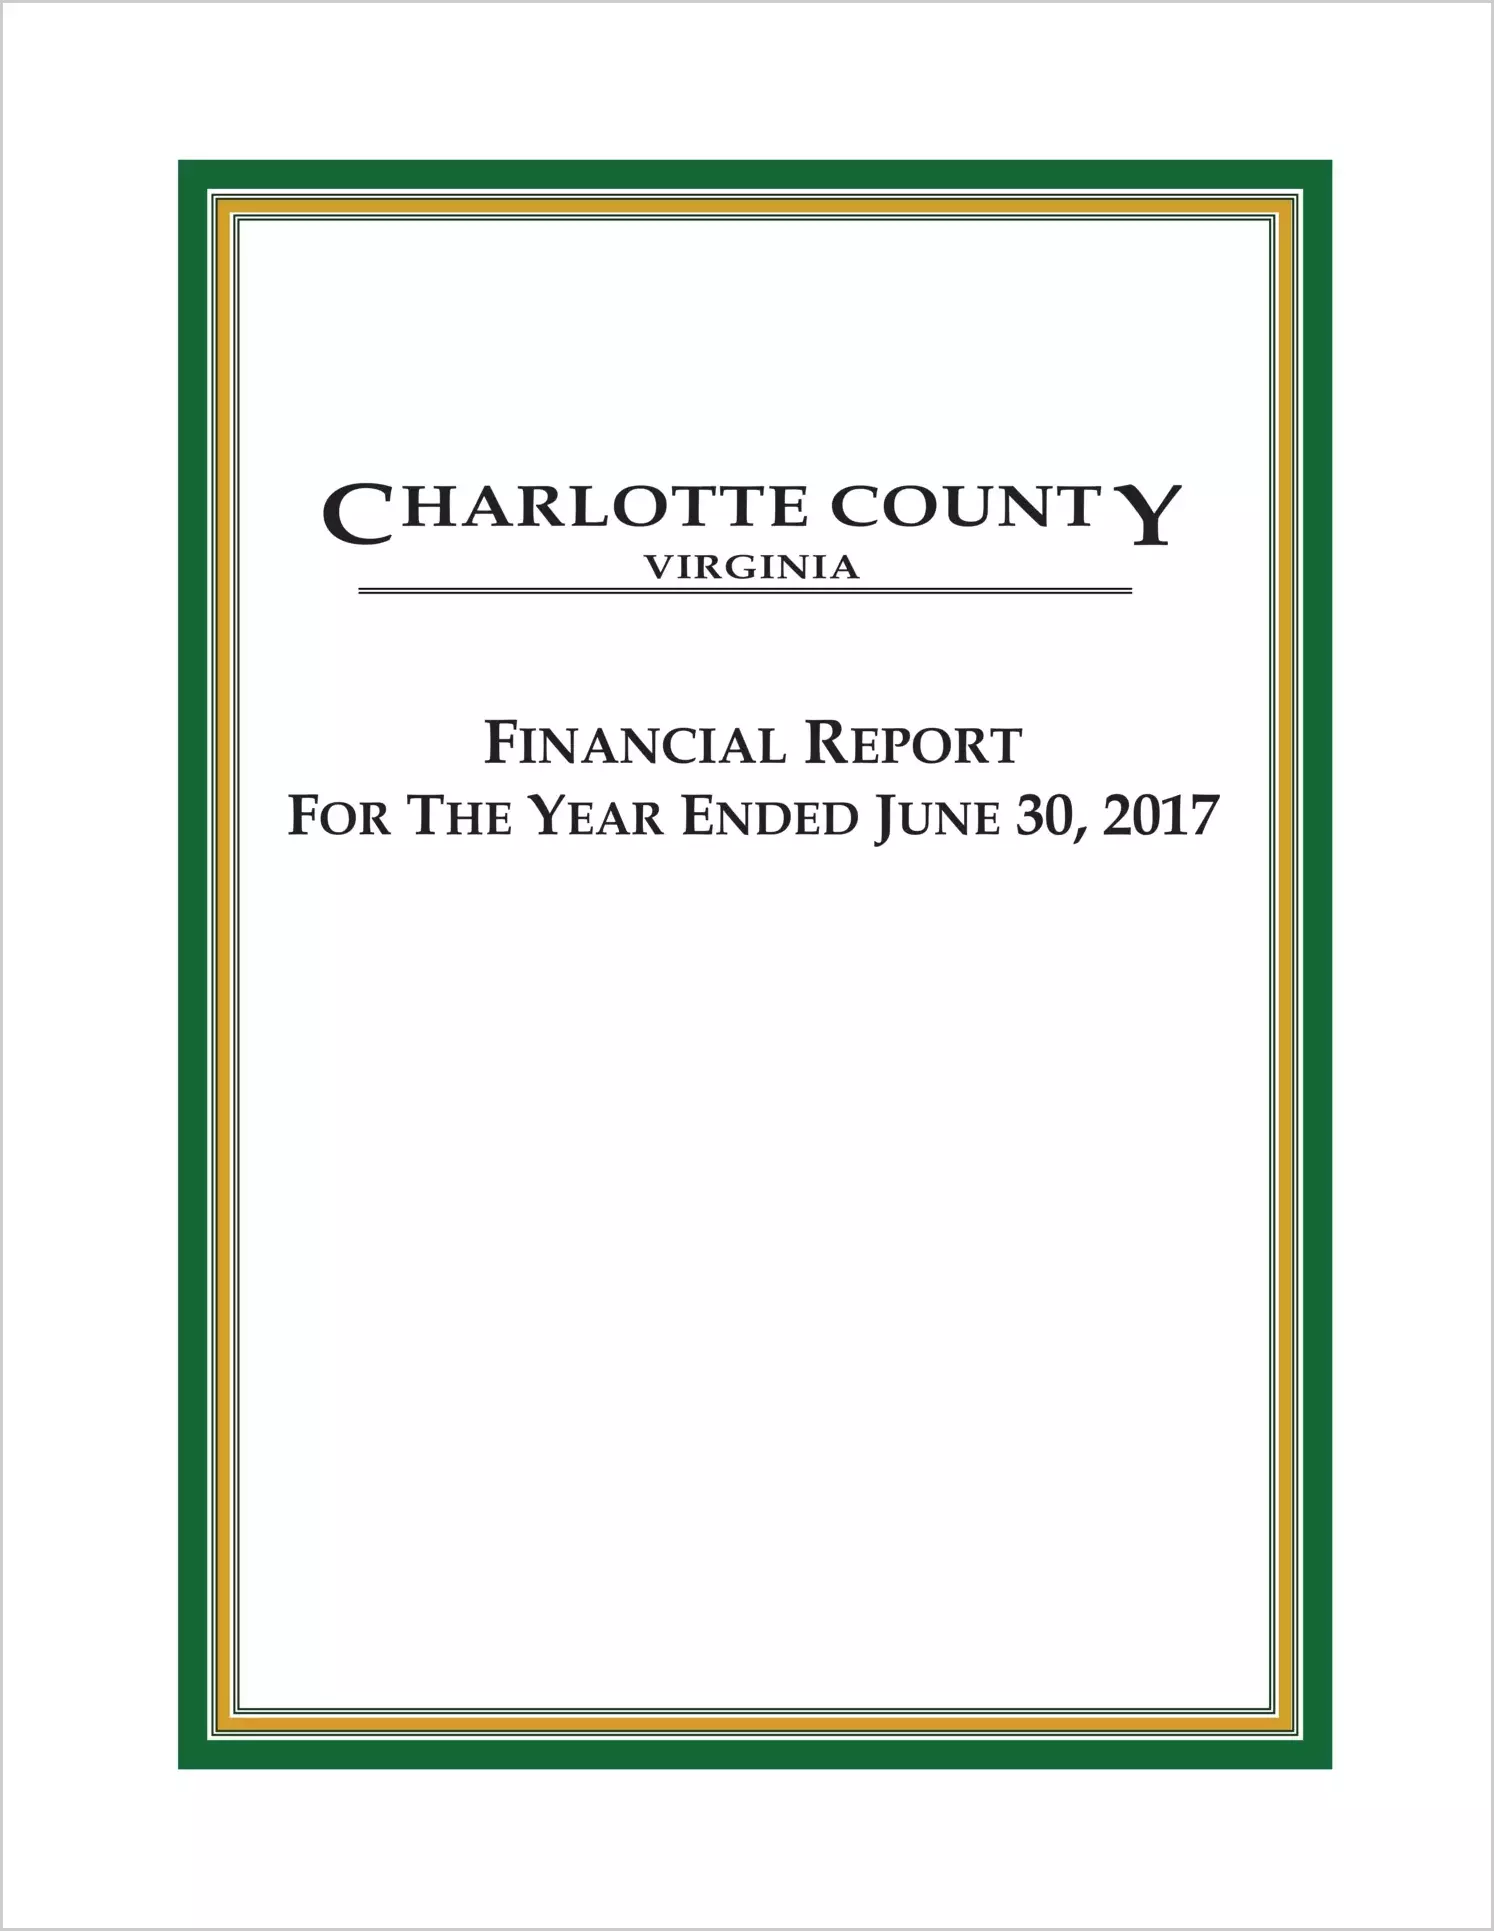 2017 Annual Financial Report for County of Charlotte